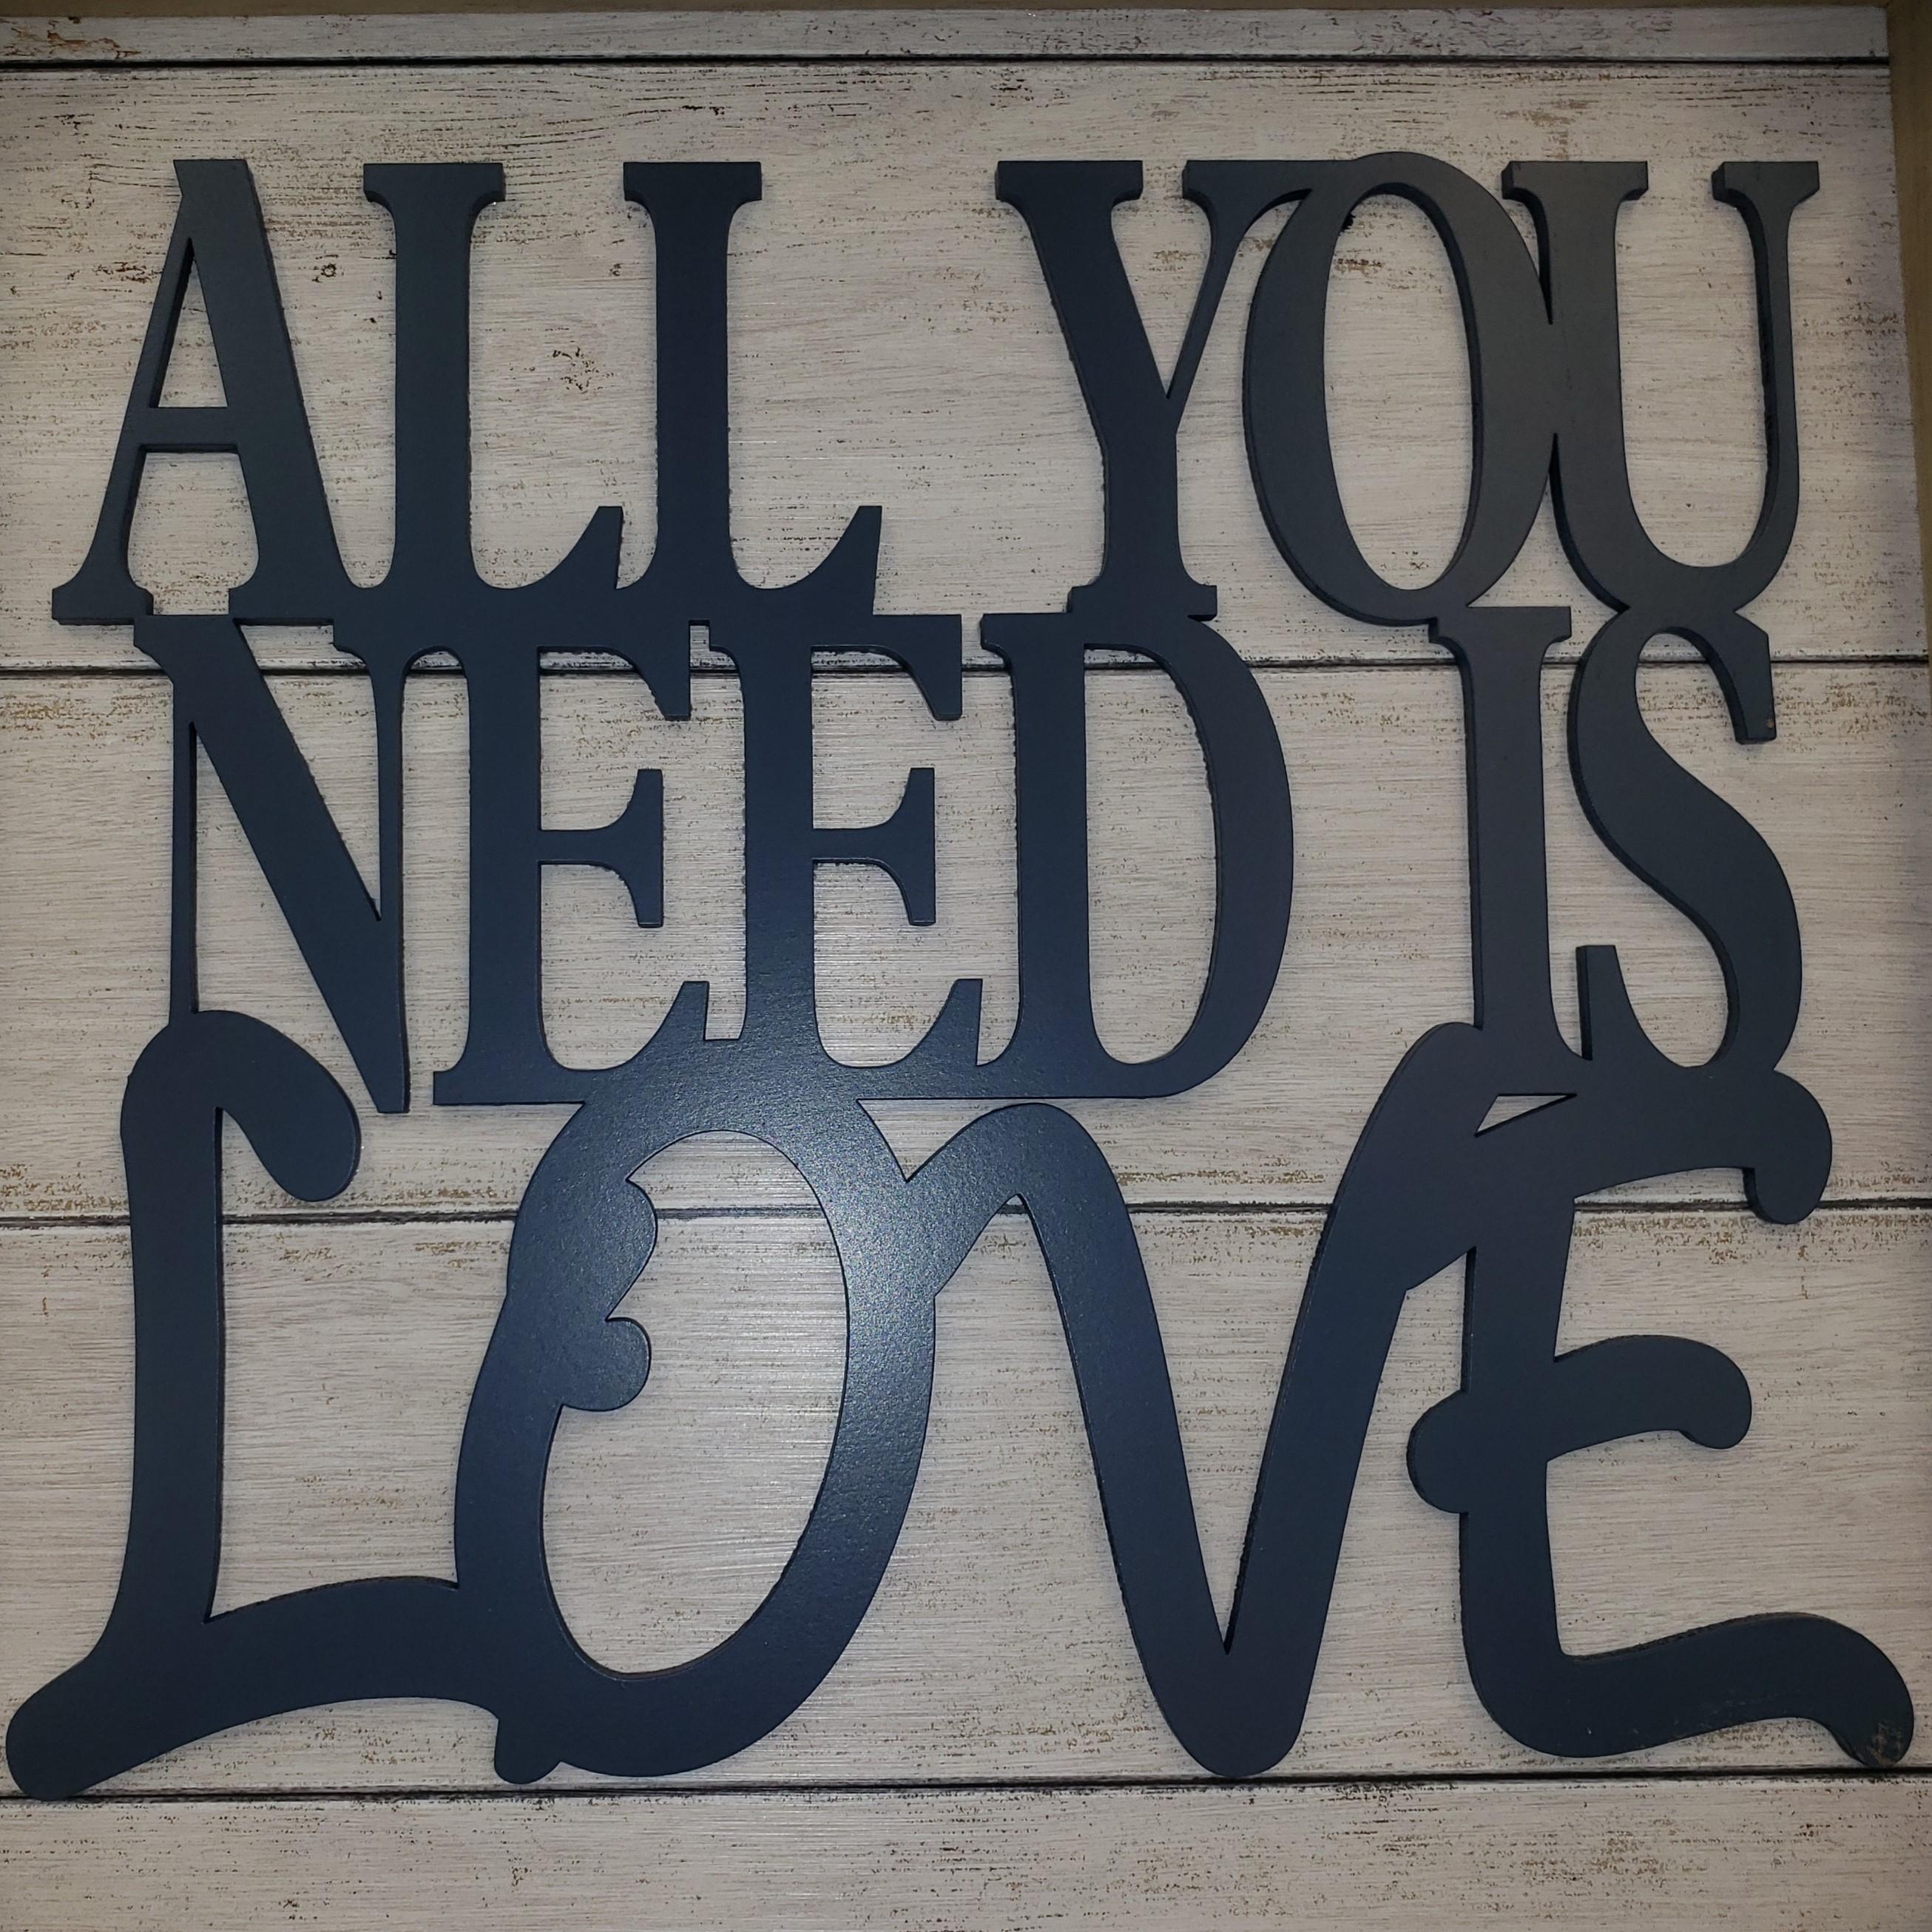 All You Need Is Love.